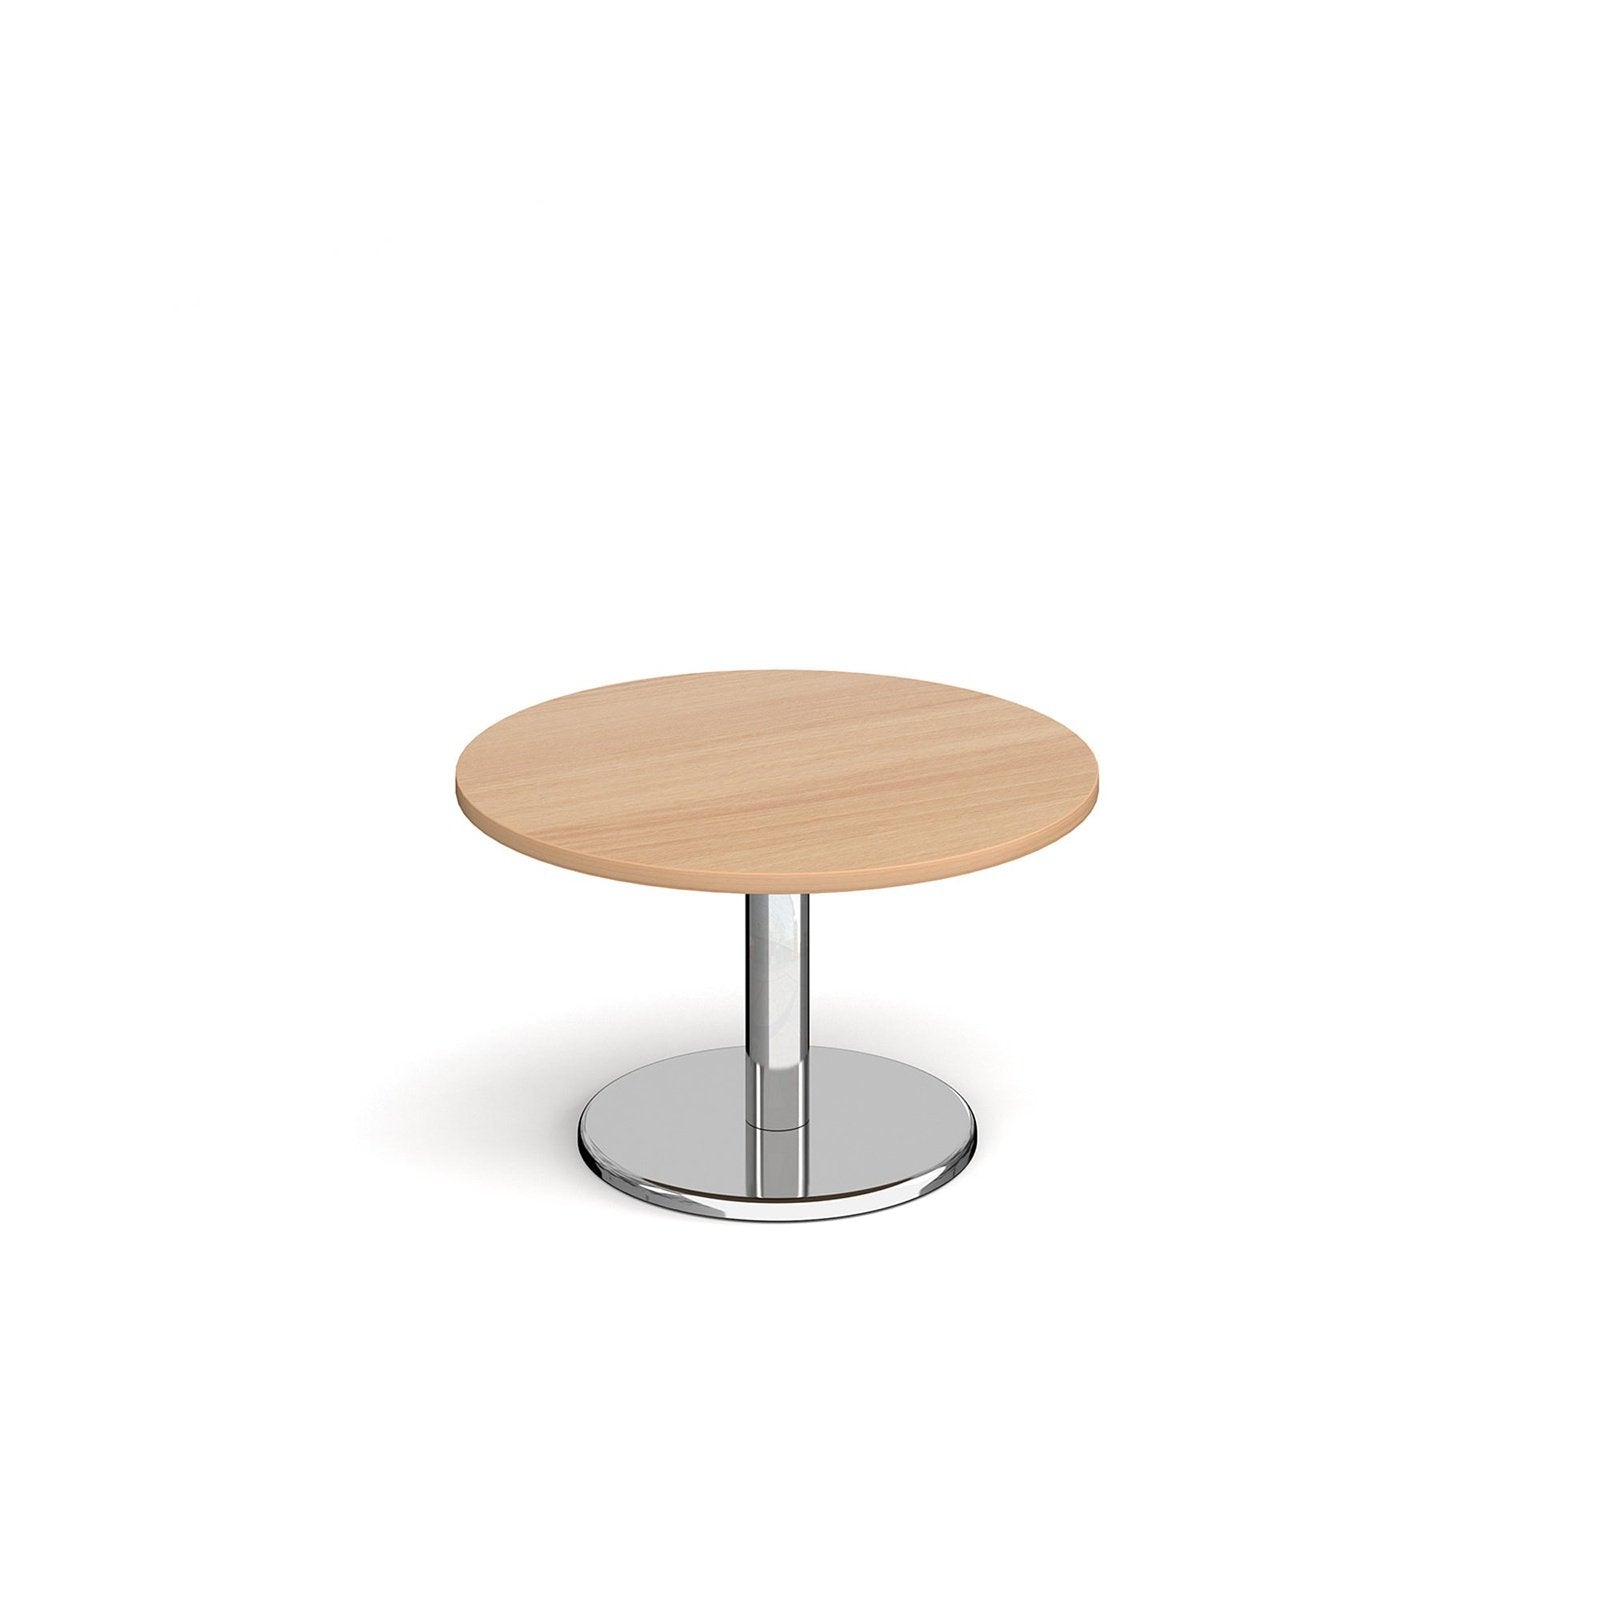 Pisa circular coffee table with round chrome base - Office Products Online